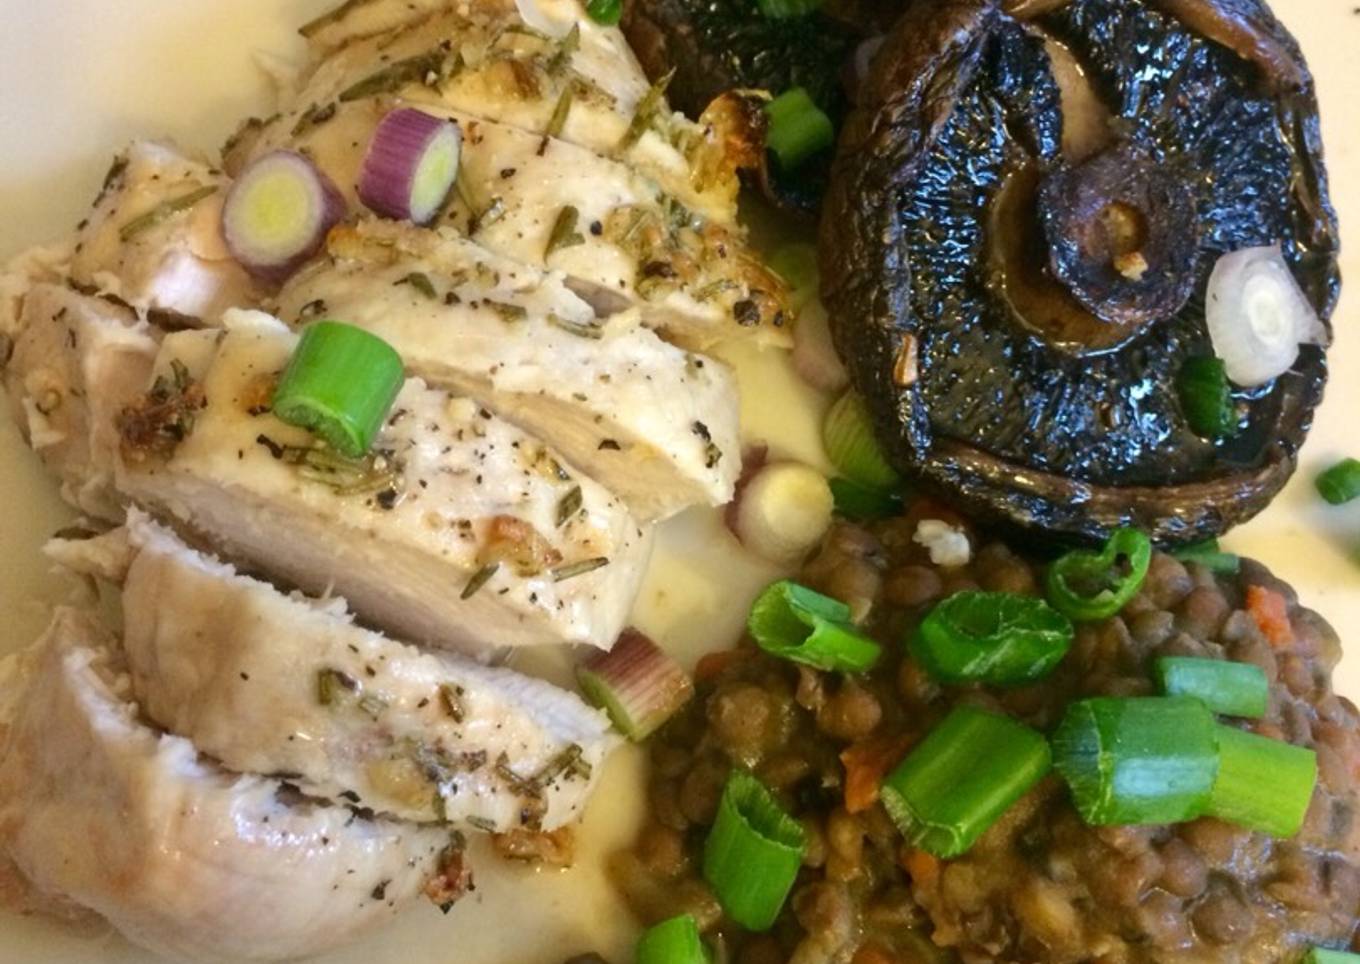 Garlic & Rosemary Chicken with Mushrooms and Lentils